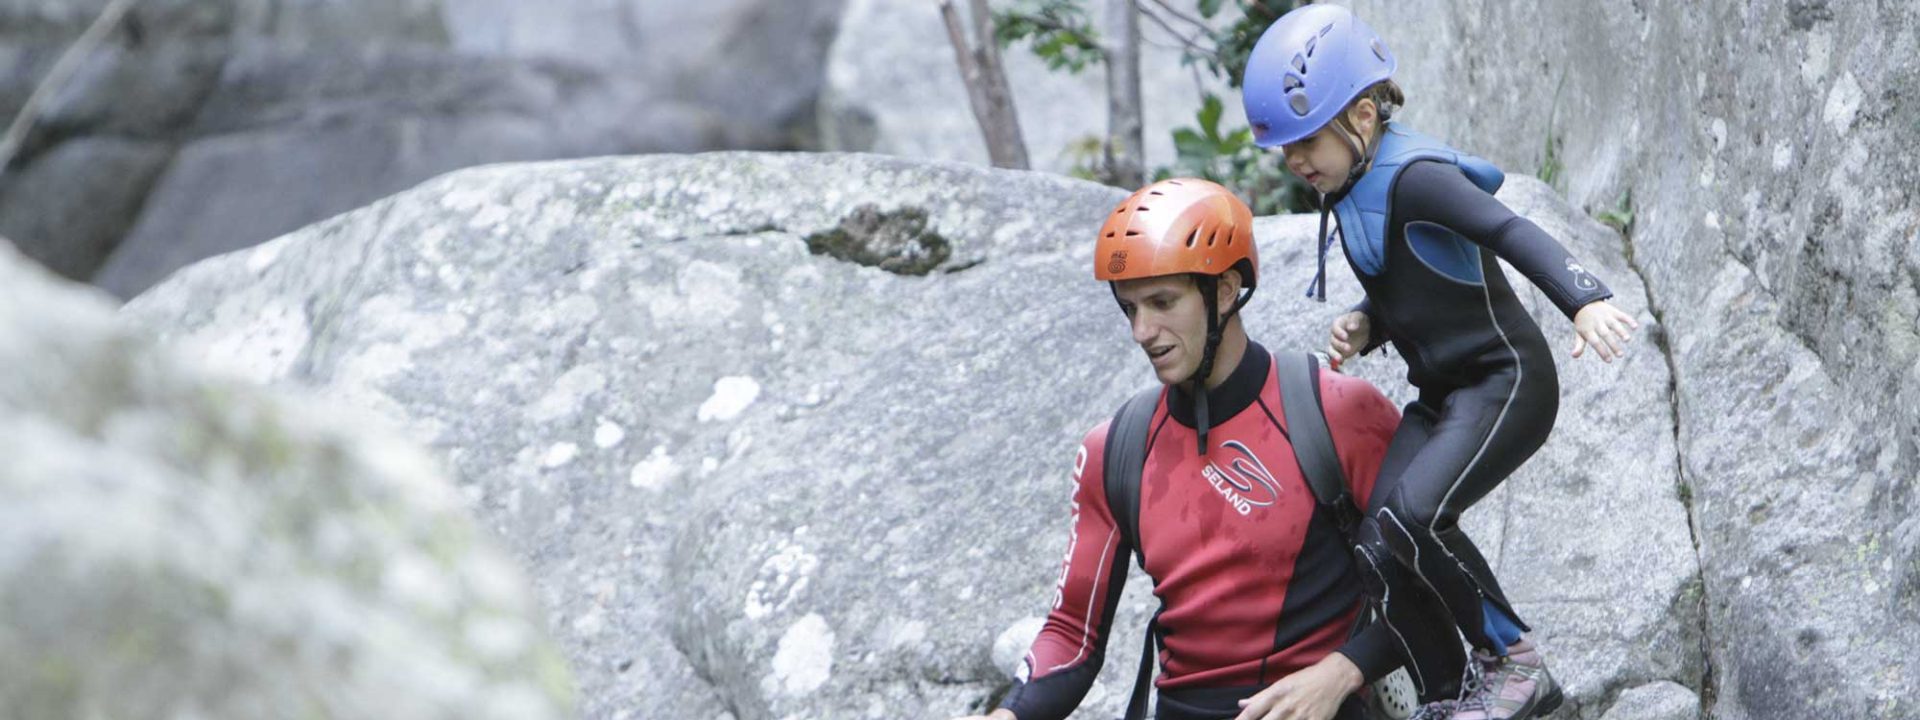 Canyoning Demi-J Famille Basse Besorgues avec GEO